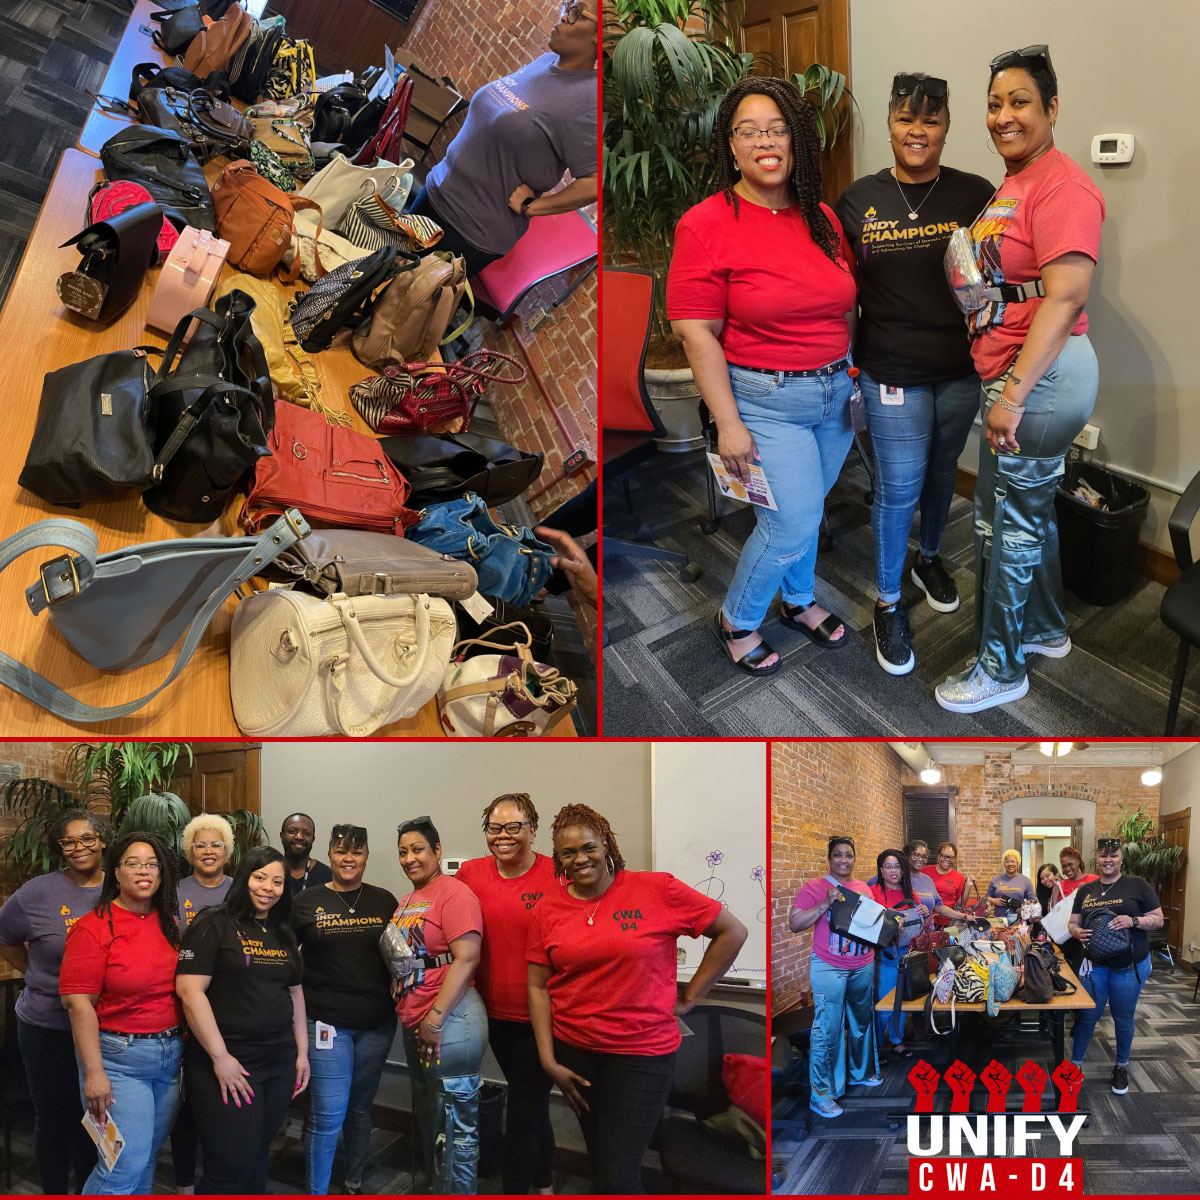 We're proud to share that @CWA4900 has made a heartfelt contribution to Indy Champions by donating over 100 stuffed purses to the Purses with Purpose initiative. This generous donation supports survivors of domestic violence and advocates for meaningful change. #CWAStrong